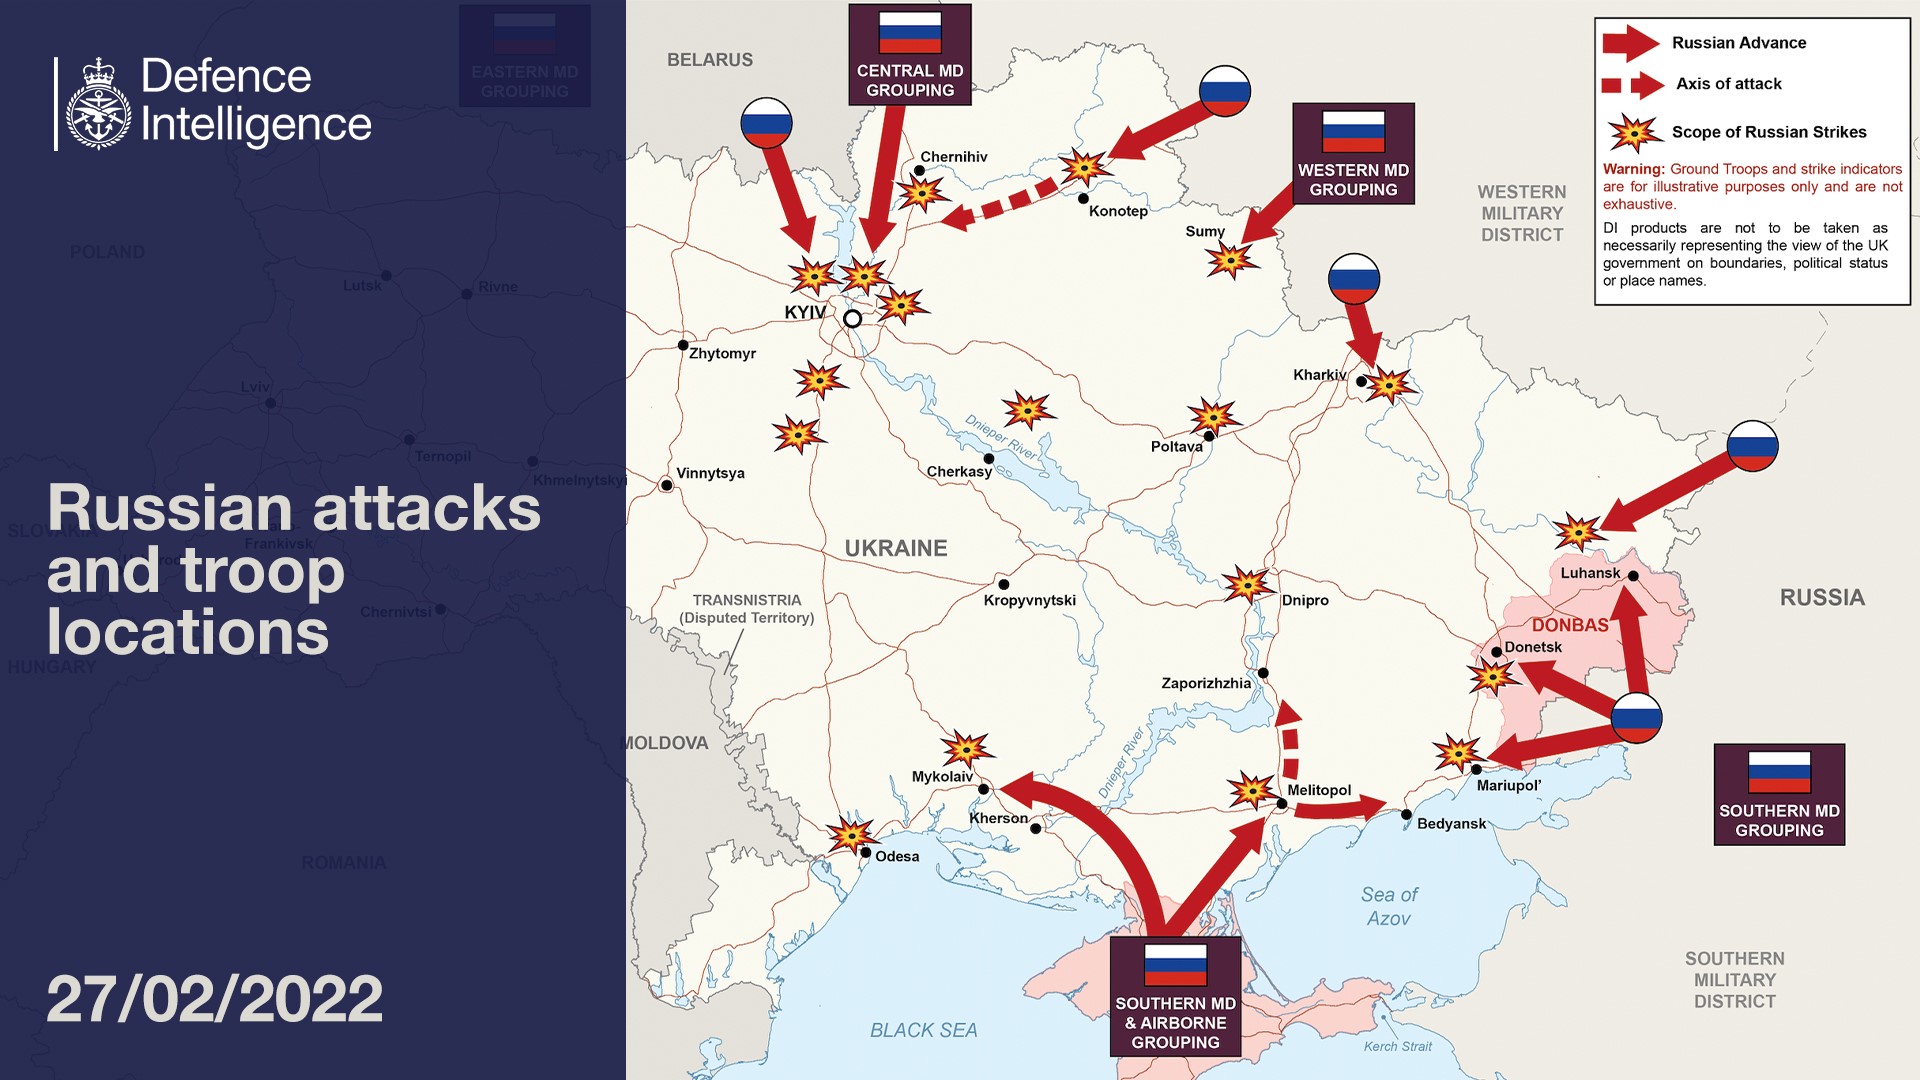 Ministry of Defence intelligence update showing Russian attacks and troop locations